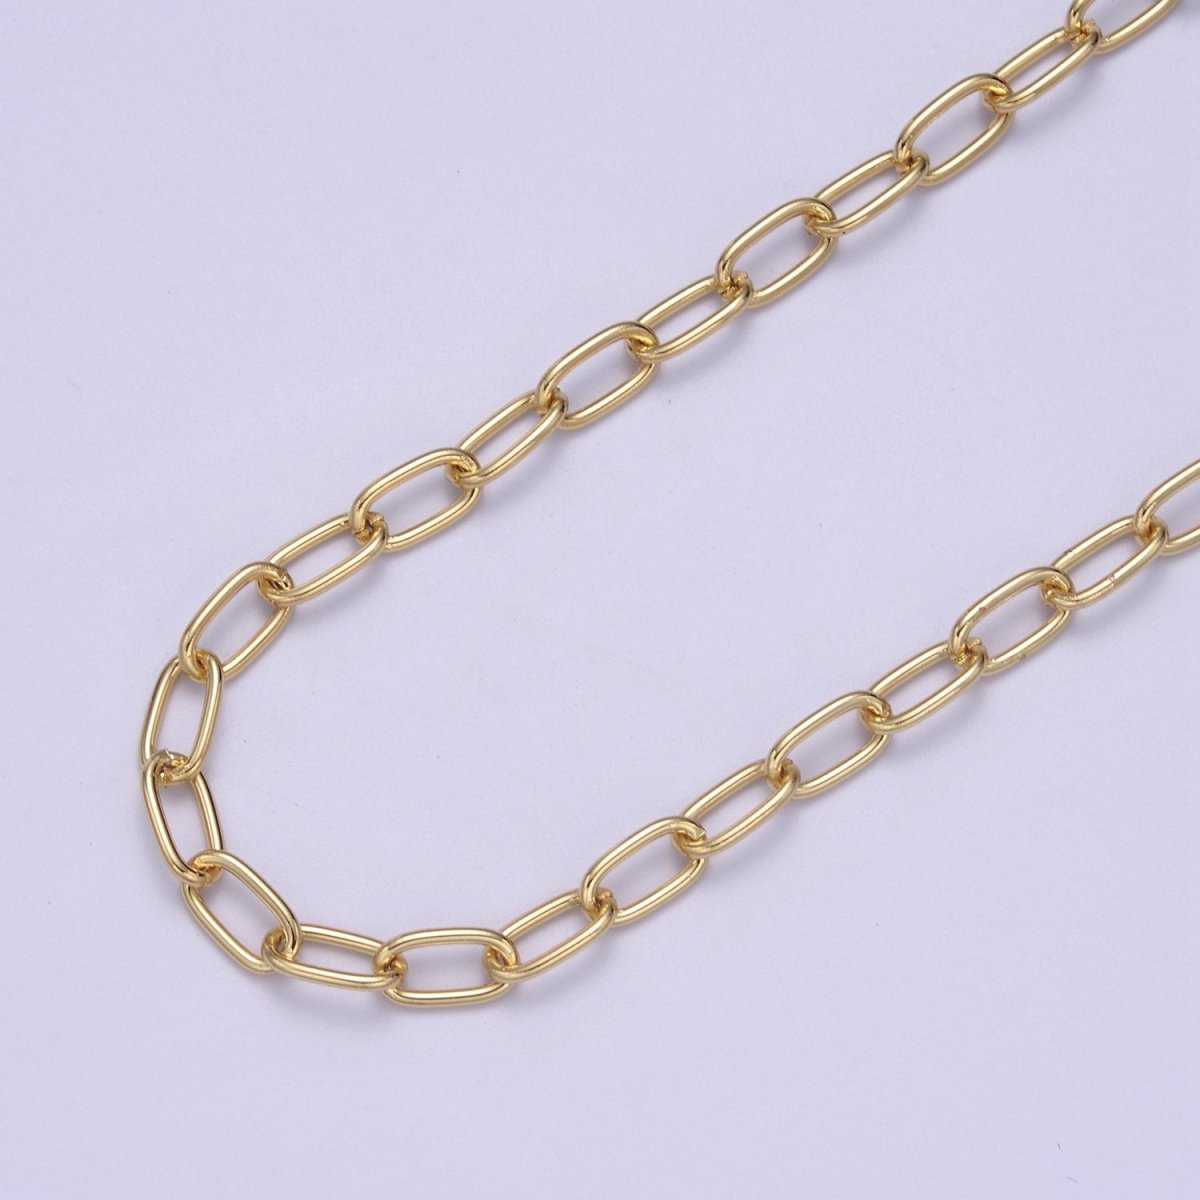 24K Gold Filled PaperClip Chain, 5mm Width Unfinished Chain For Jewelry Making Supply Component | ROLL-649 Clearance Pricing - DLUXCA